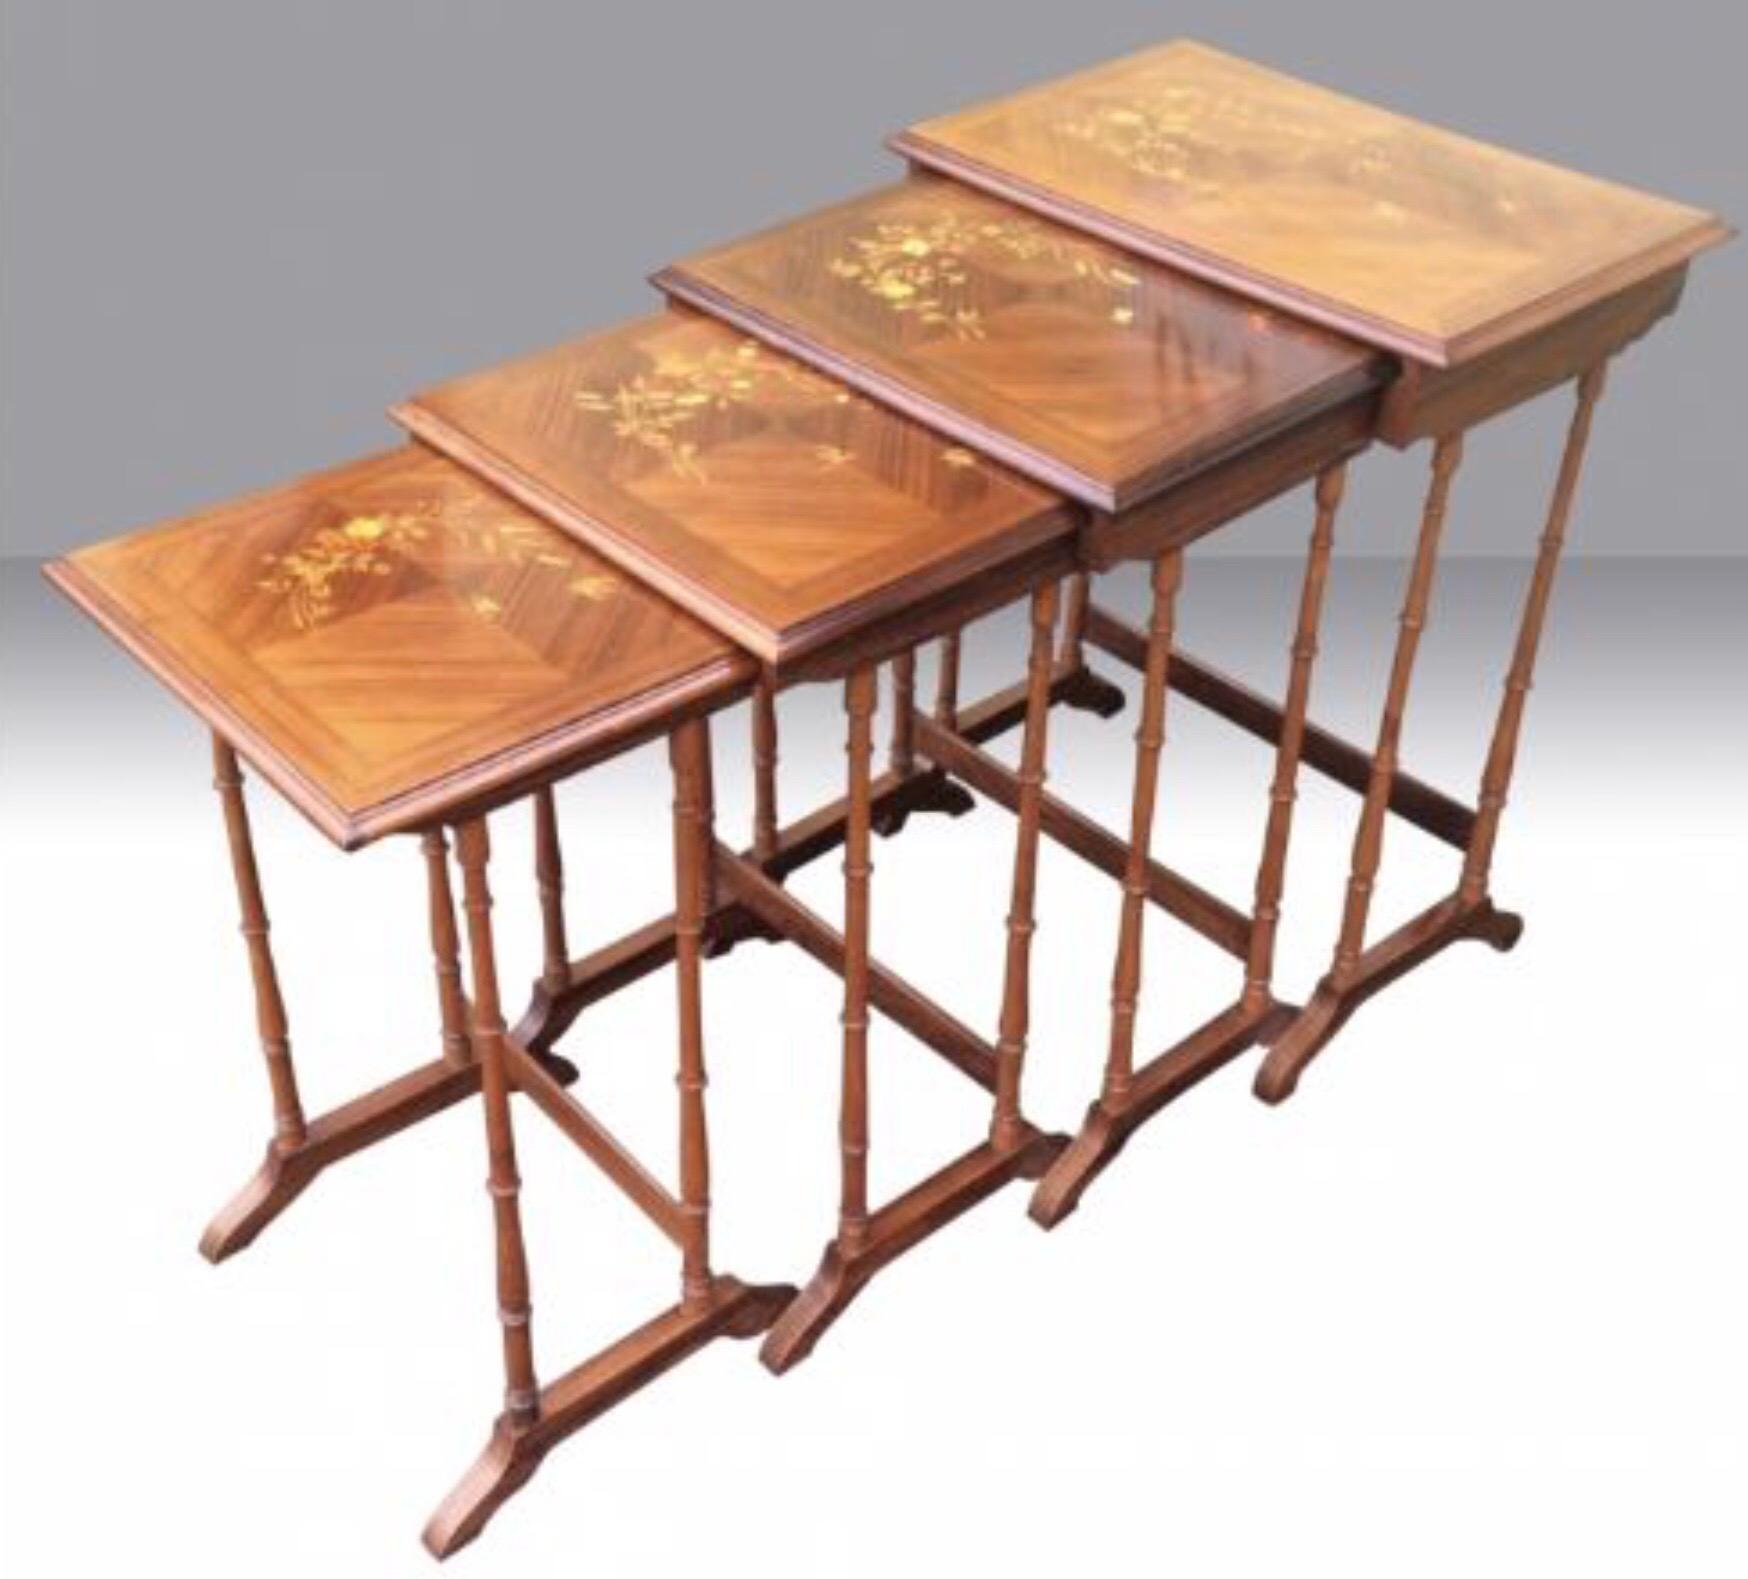 British Stunning Antique Kingwood Nest of Four Tables